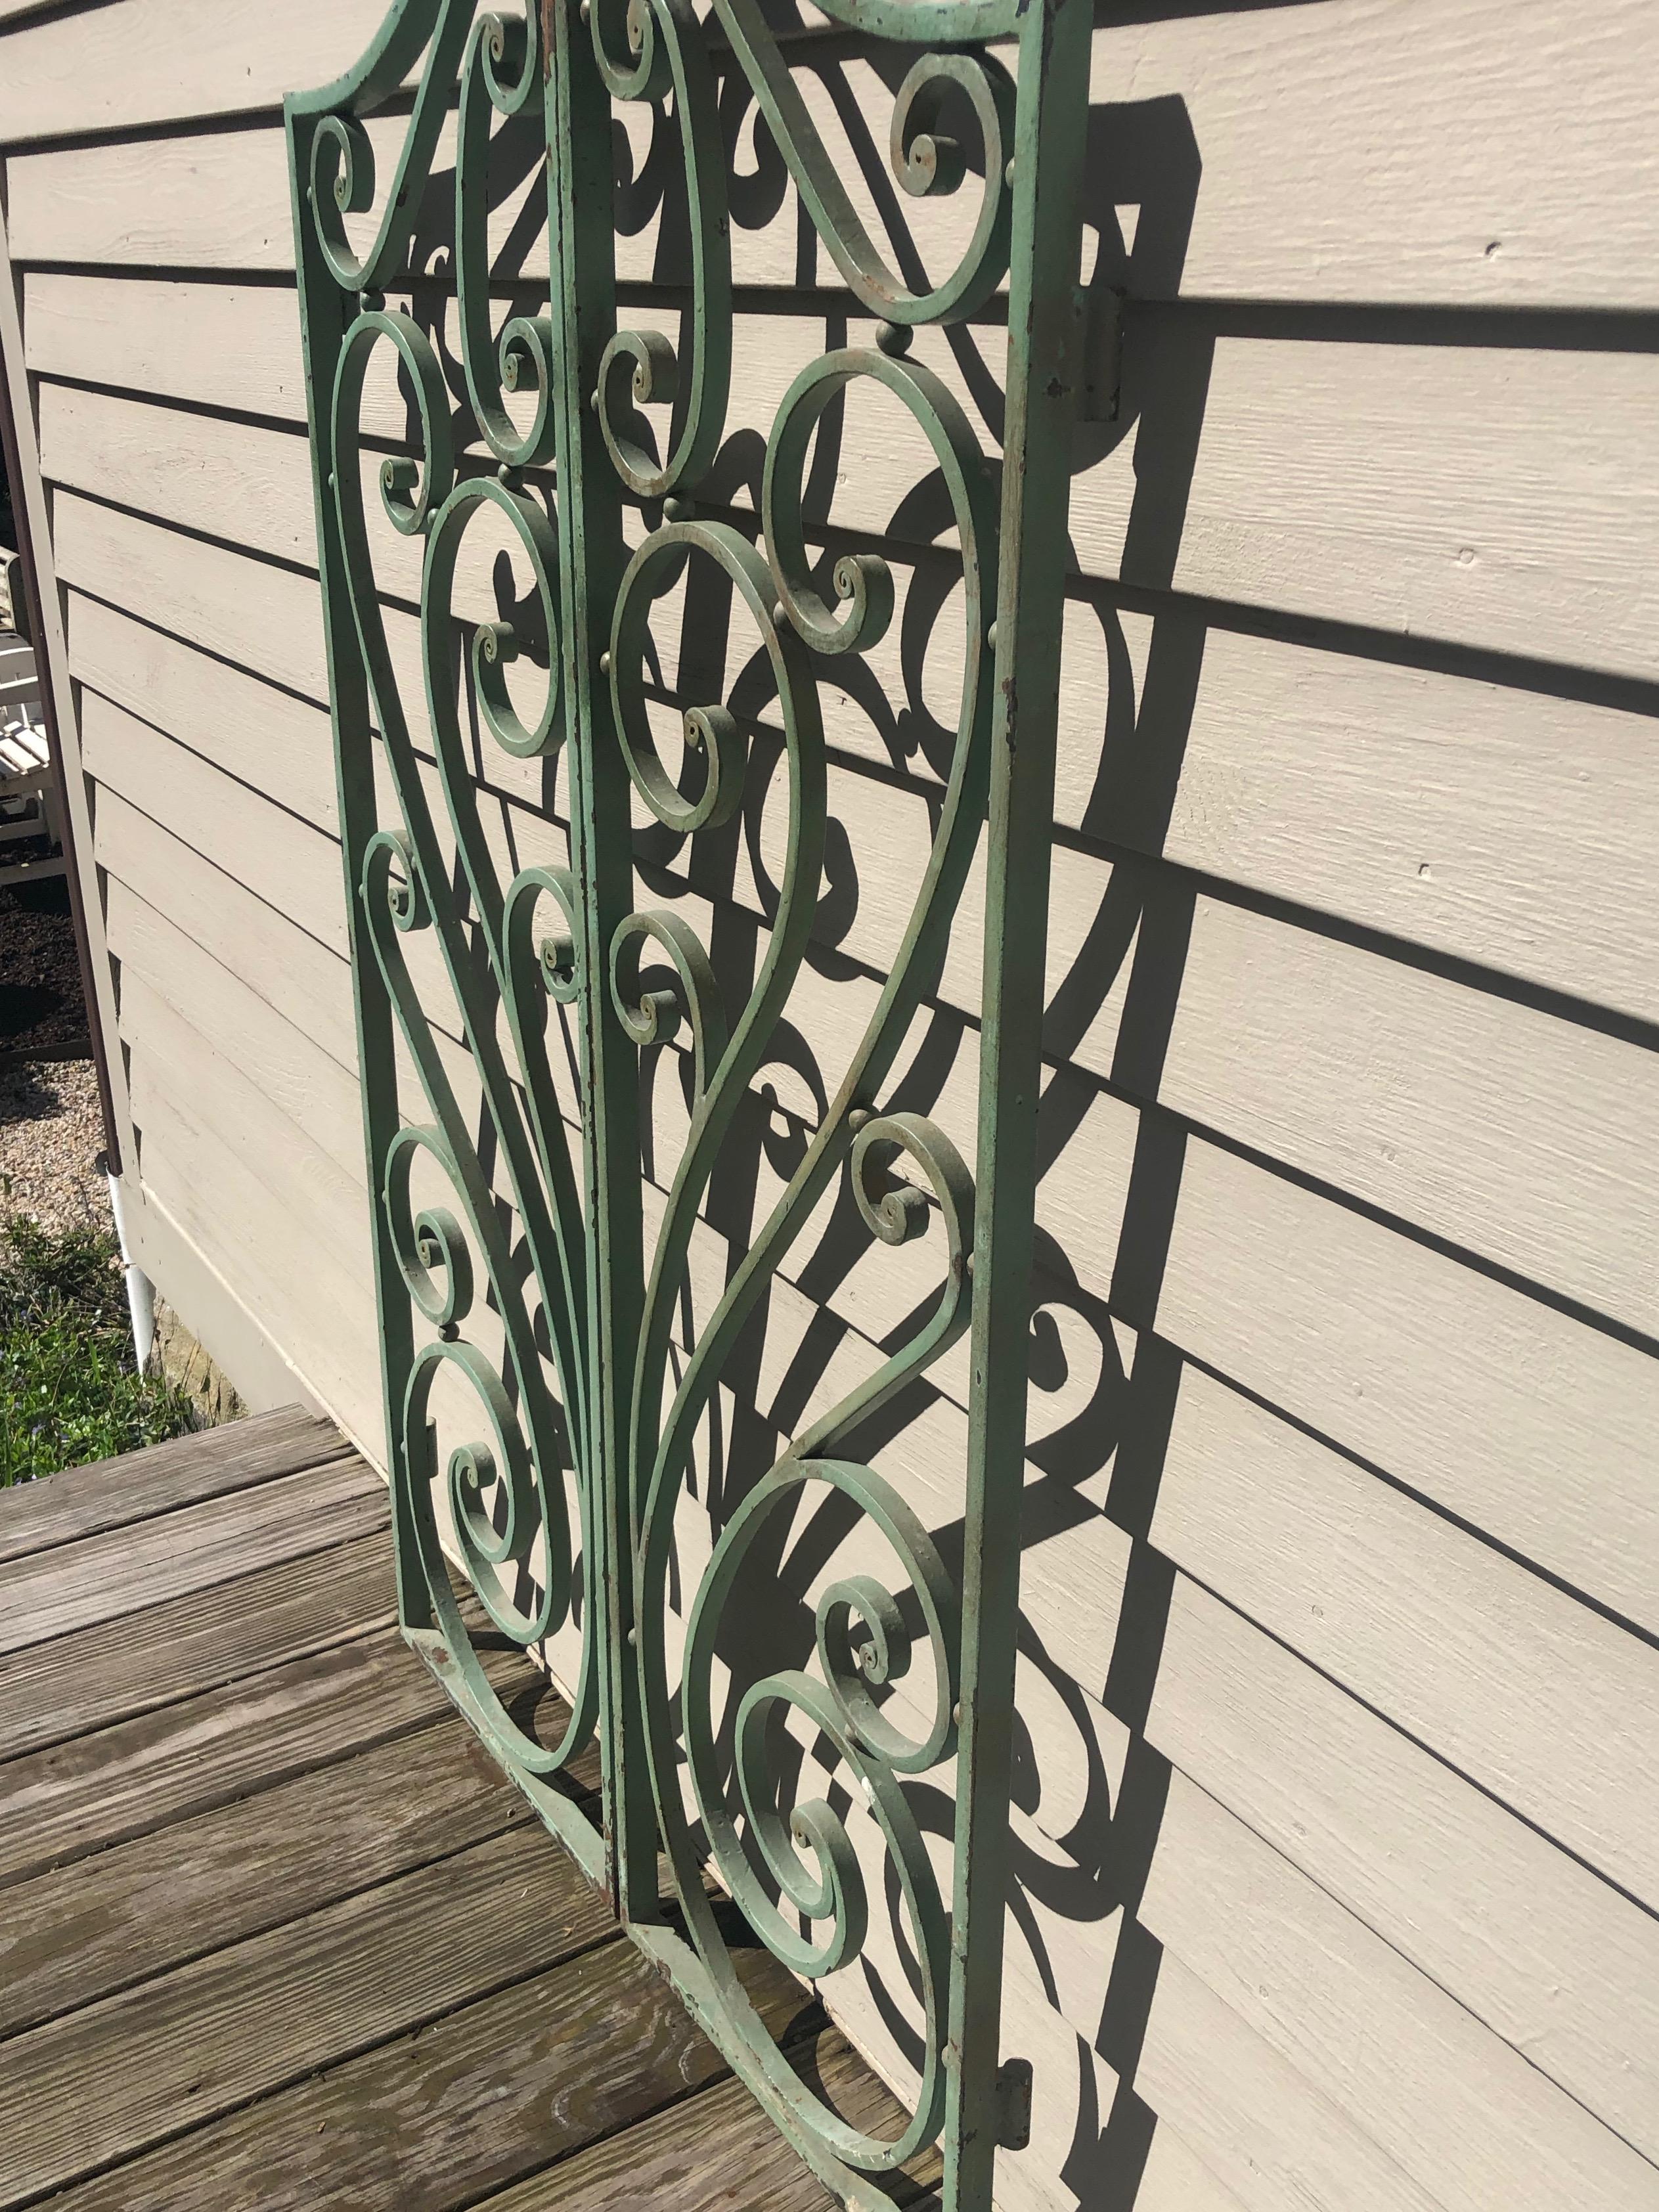 We found these gates in Provence, along with an identical, but slightly larger pair (POR 1060) that come complete with their hinges and mounting hardware, to make installation a snap. Beautifully wrought with a curved top and loads of sensuous